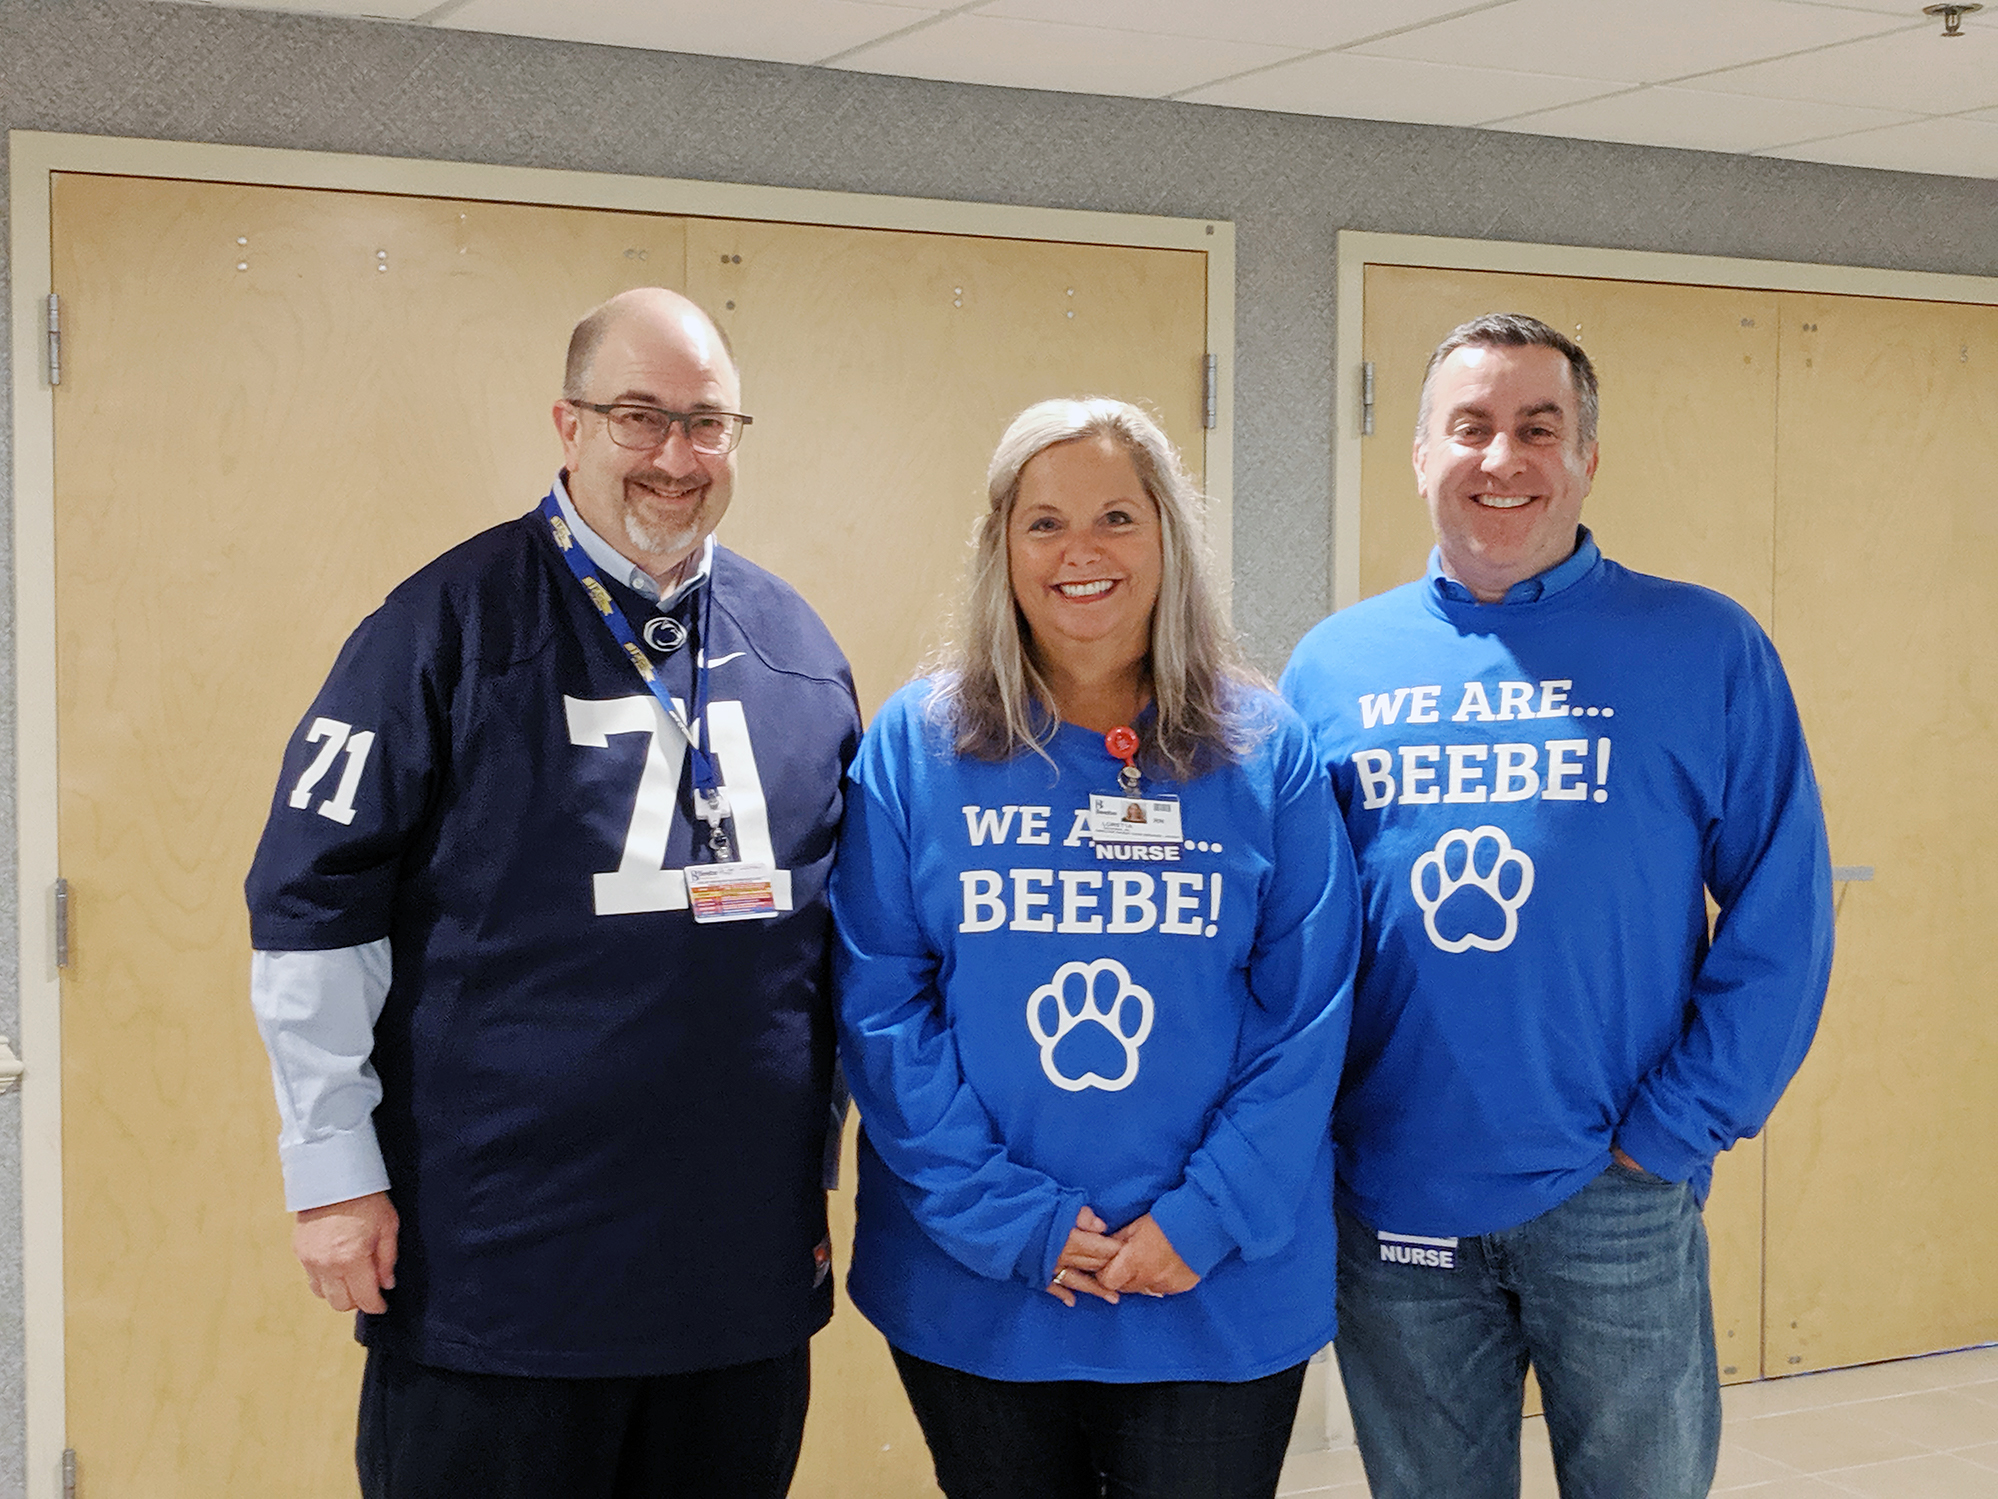 Loretta Ostroski, MSN, RN, is the recipient of Beebe Healthcare’s September 2019 L.O.V.E. Letter. Also pictured are Rick Schaffner, Interim CEO, Executive Vice President and Chief Operating Officer (left) and Steve Rhone, Vice President and Chief Nursing 